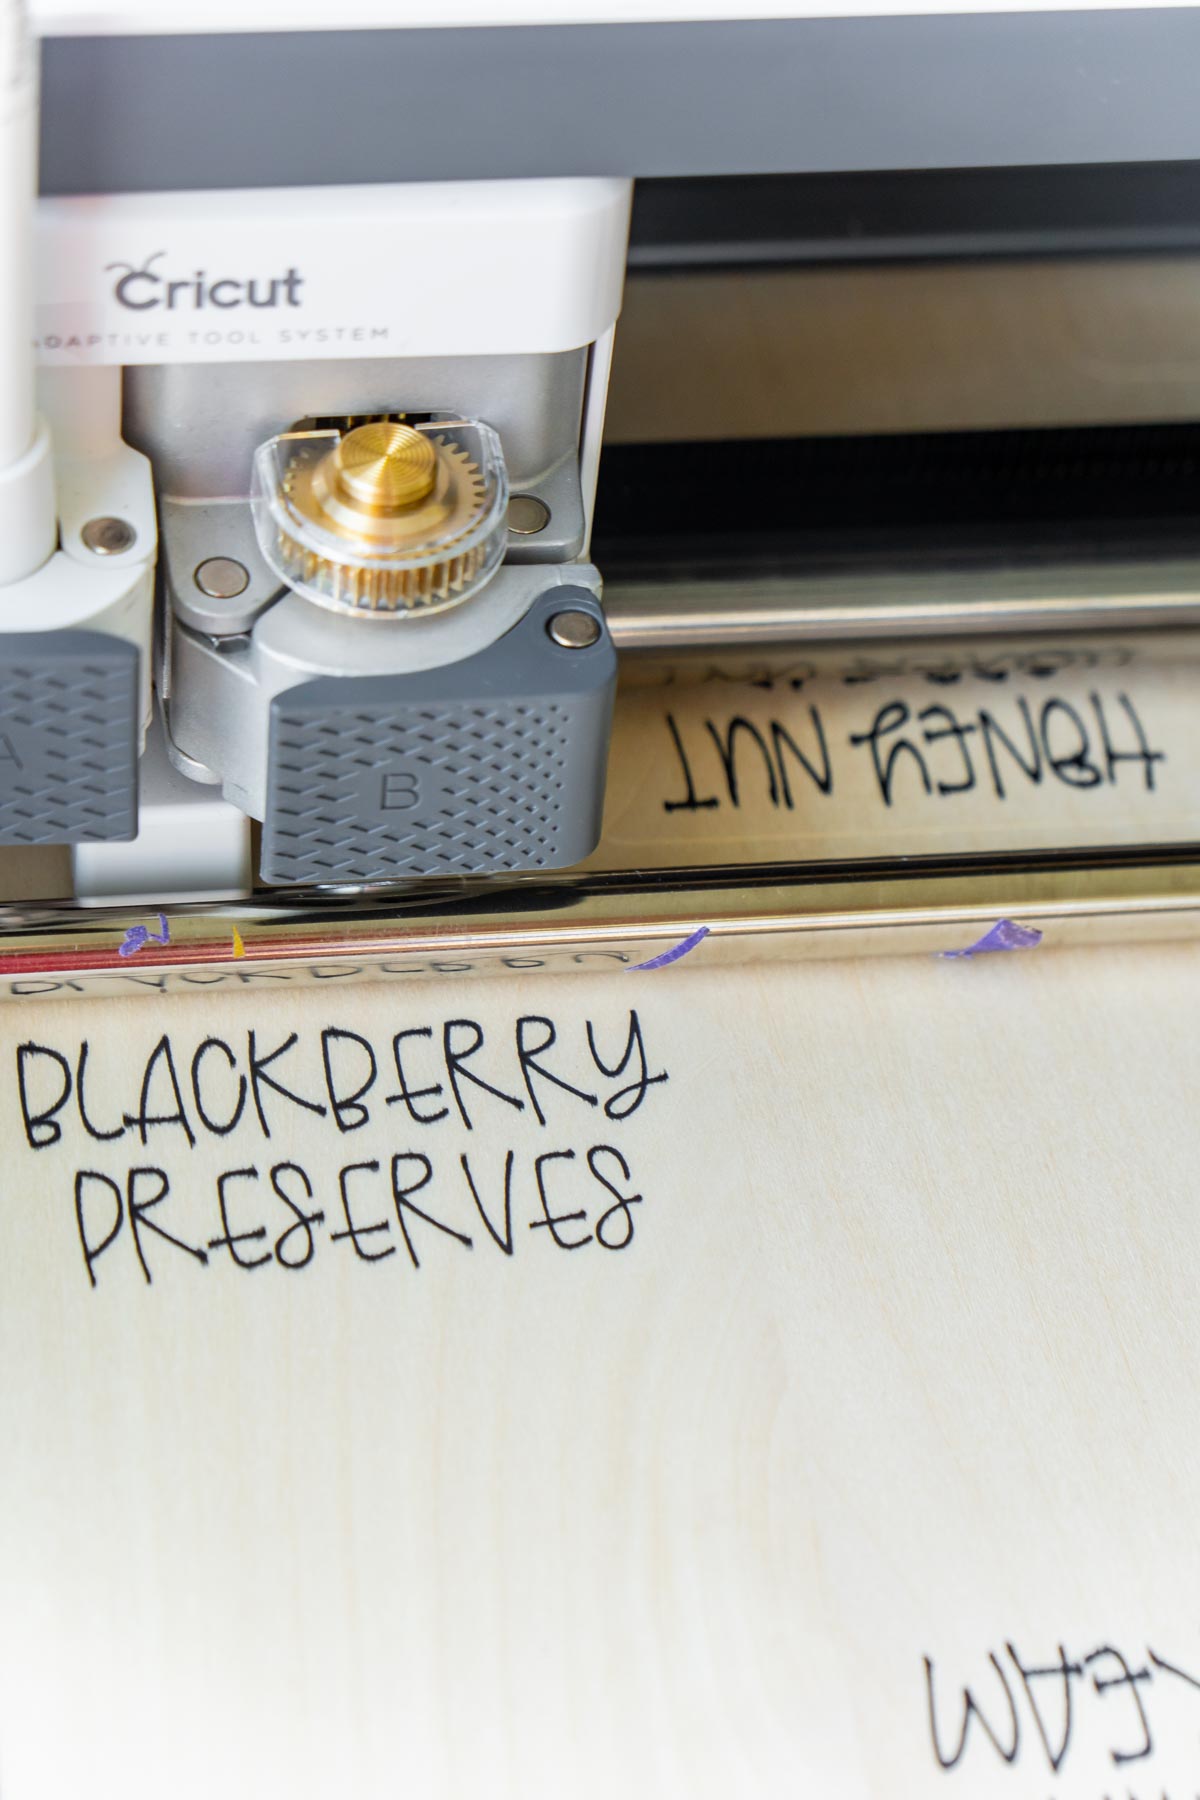 Cricut Maker writing letters with a pen